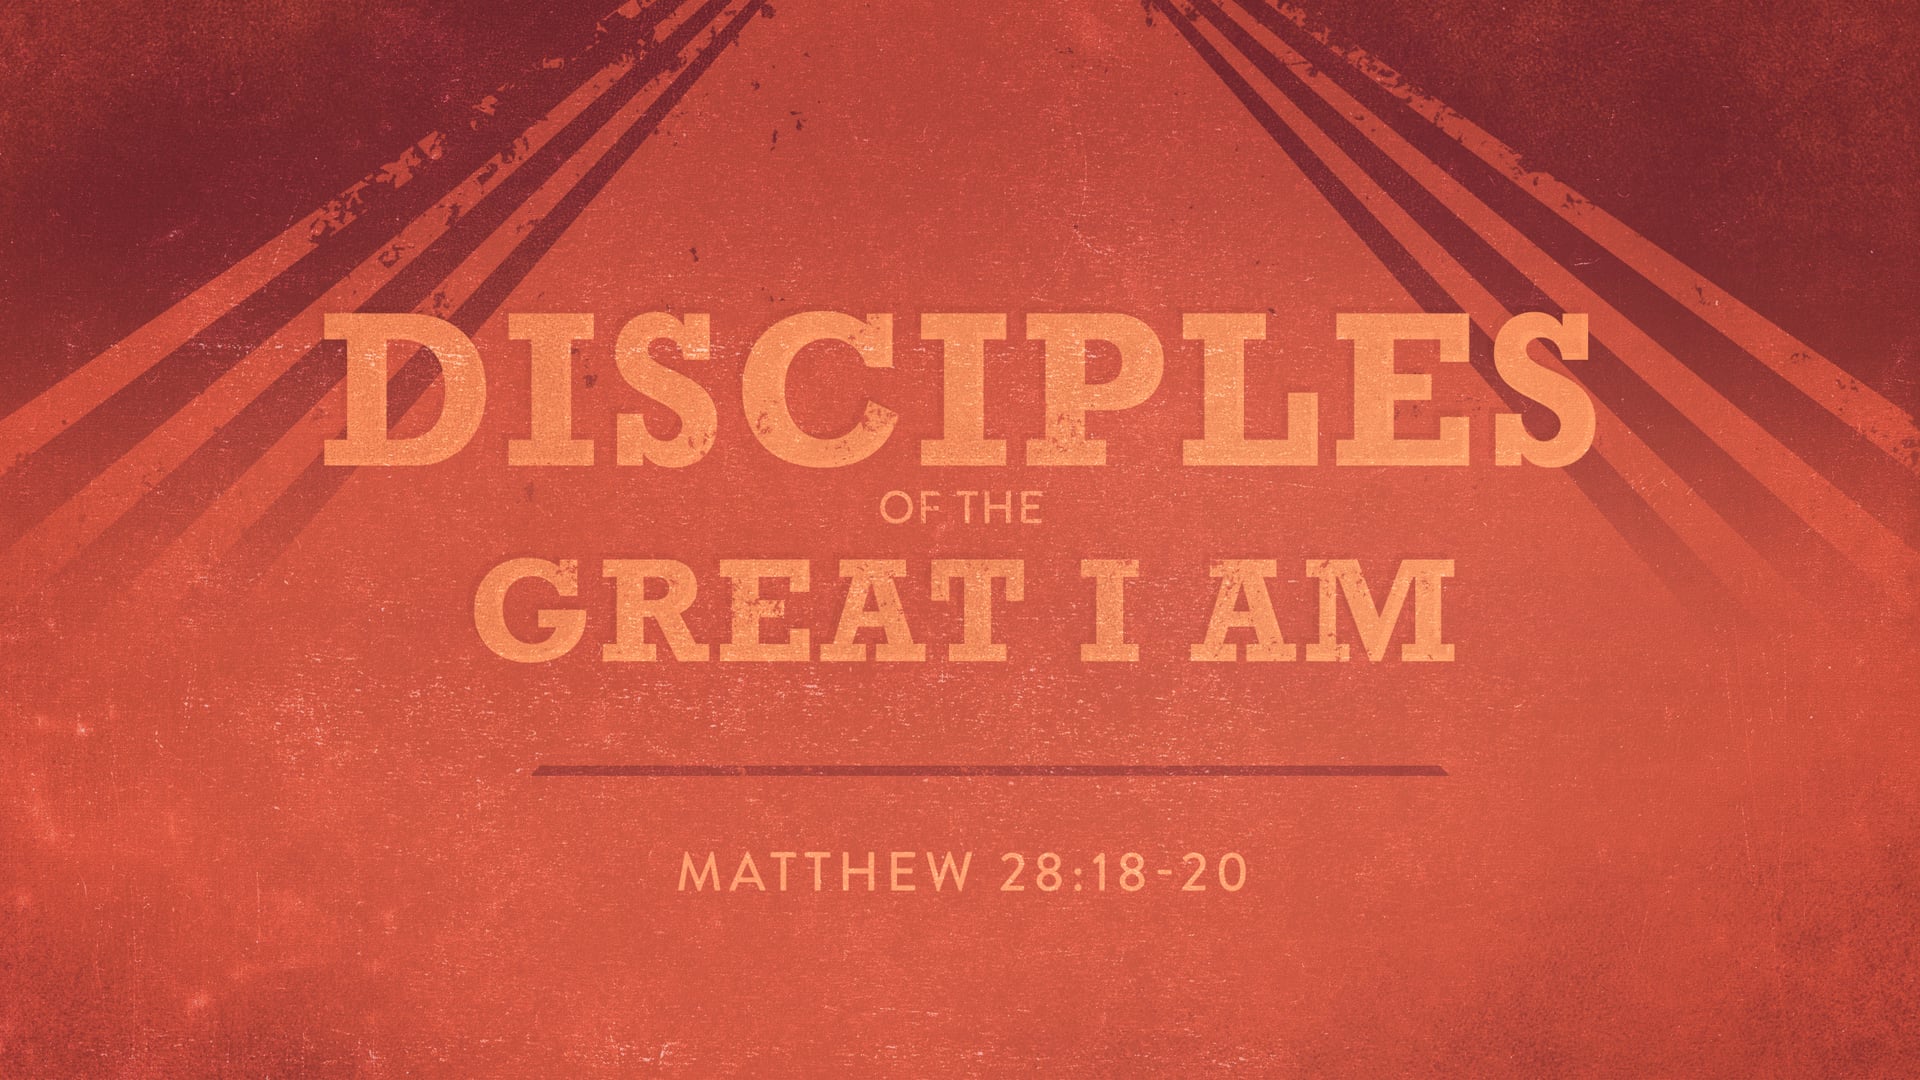 Disciples of the Great I am